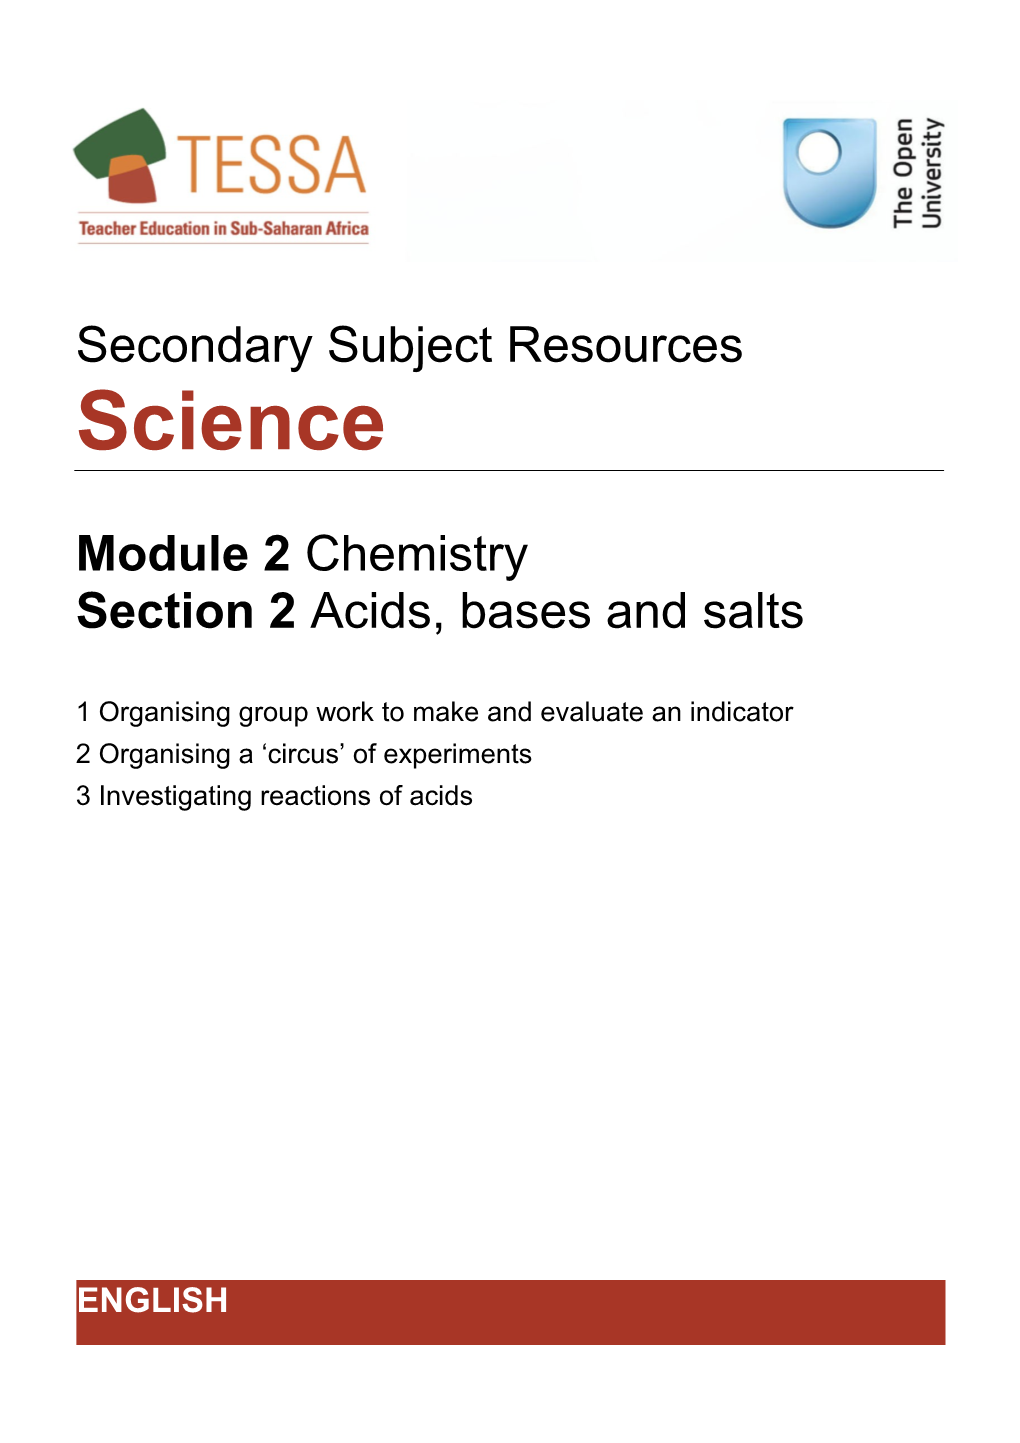 Section 2 : Acids, Bases and Salts